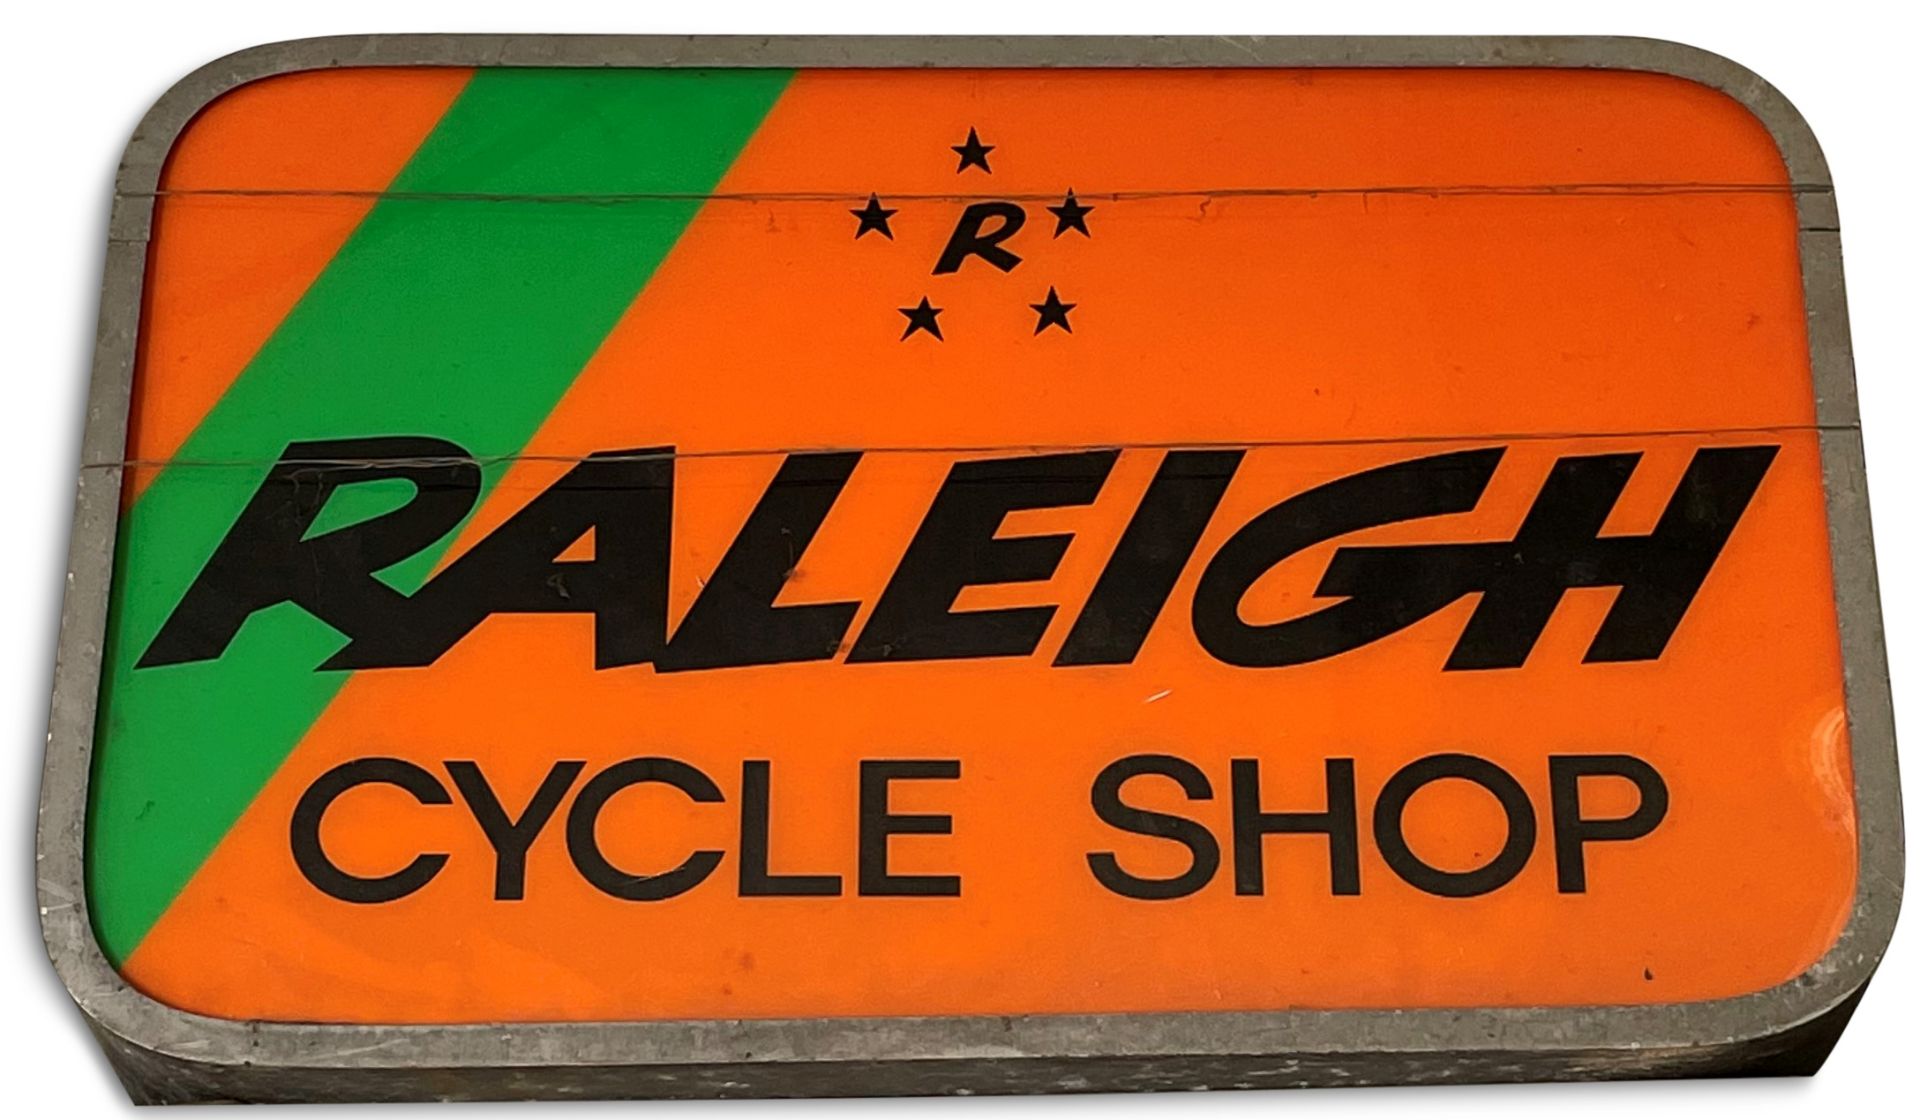 A Raleigh cycle shop illuminated double sided sign,